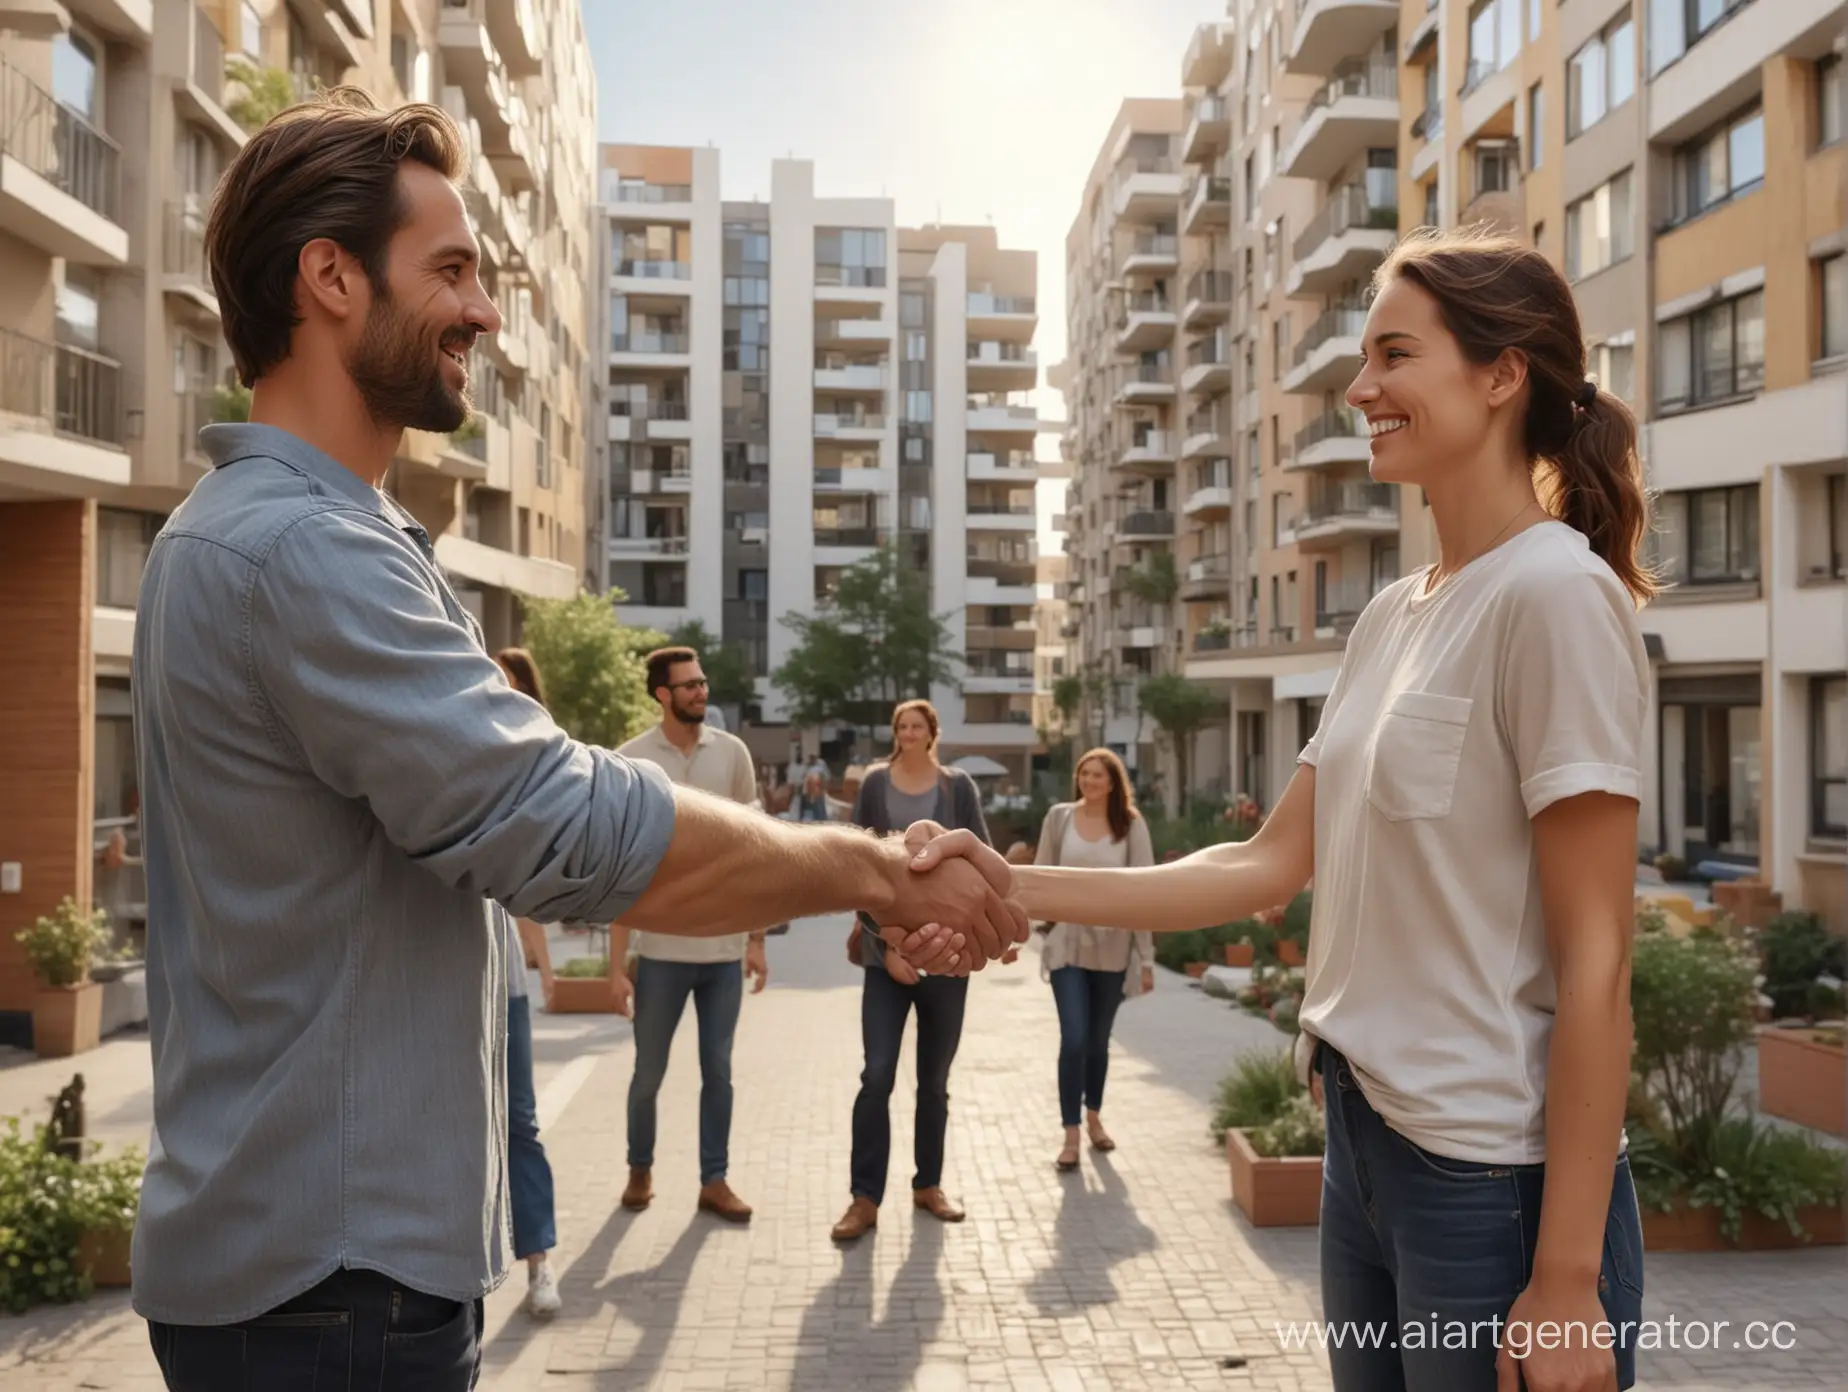 man shaking hands with woman, neighbors, friends, joy, cooperation, casual clothing, trust, courtyard background, modern high-rise building, maximum photorealism, hyperrealism, sunny day, foreground in focus, background slightly blurred, 8K, highly detailed, 16:9